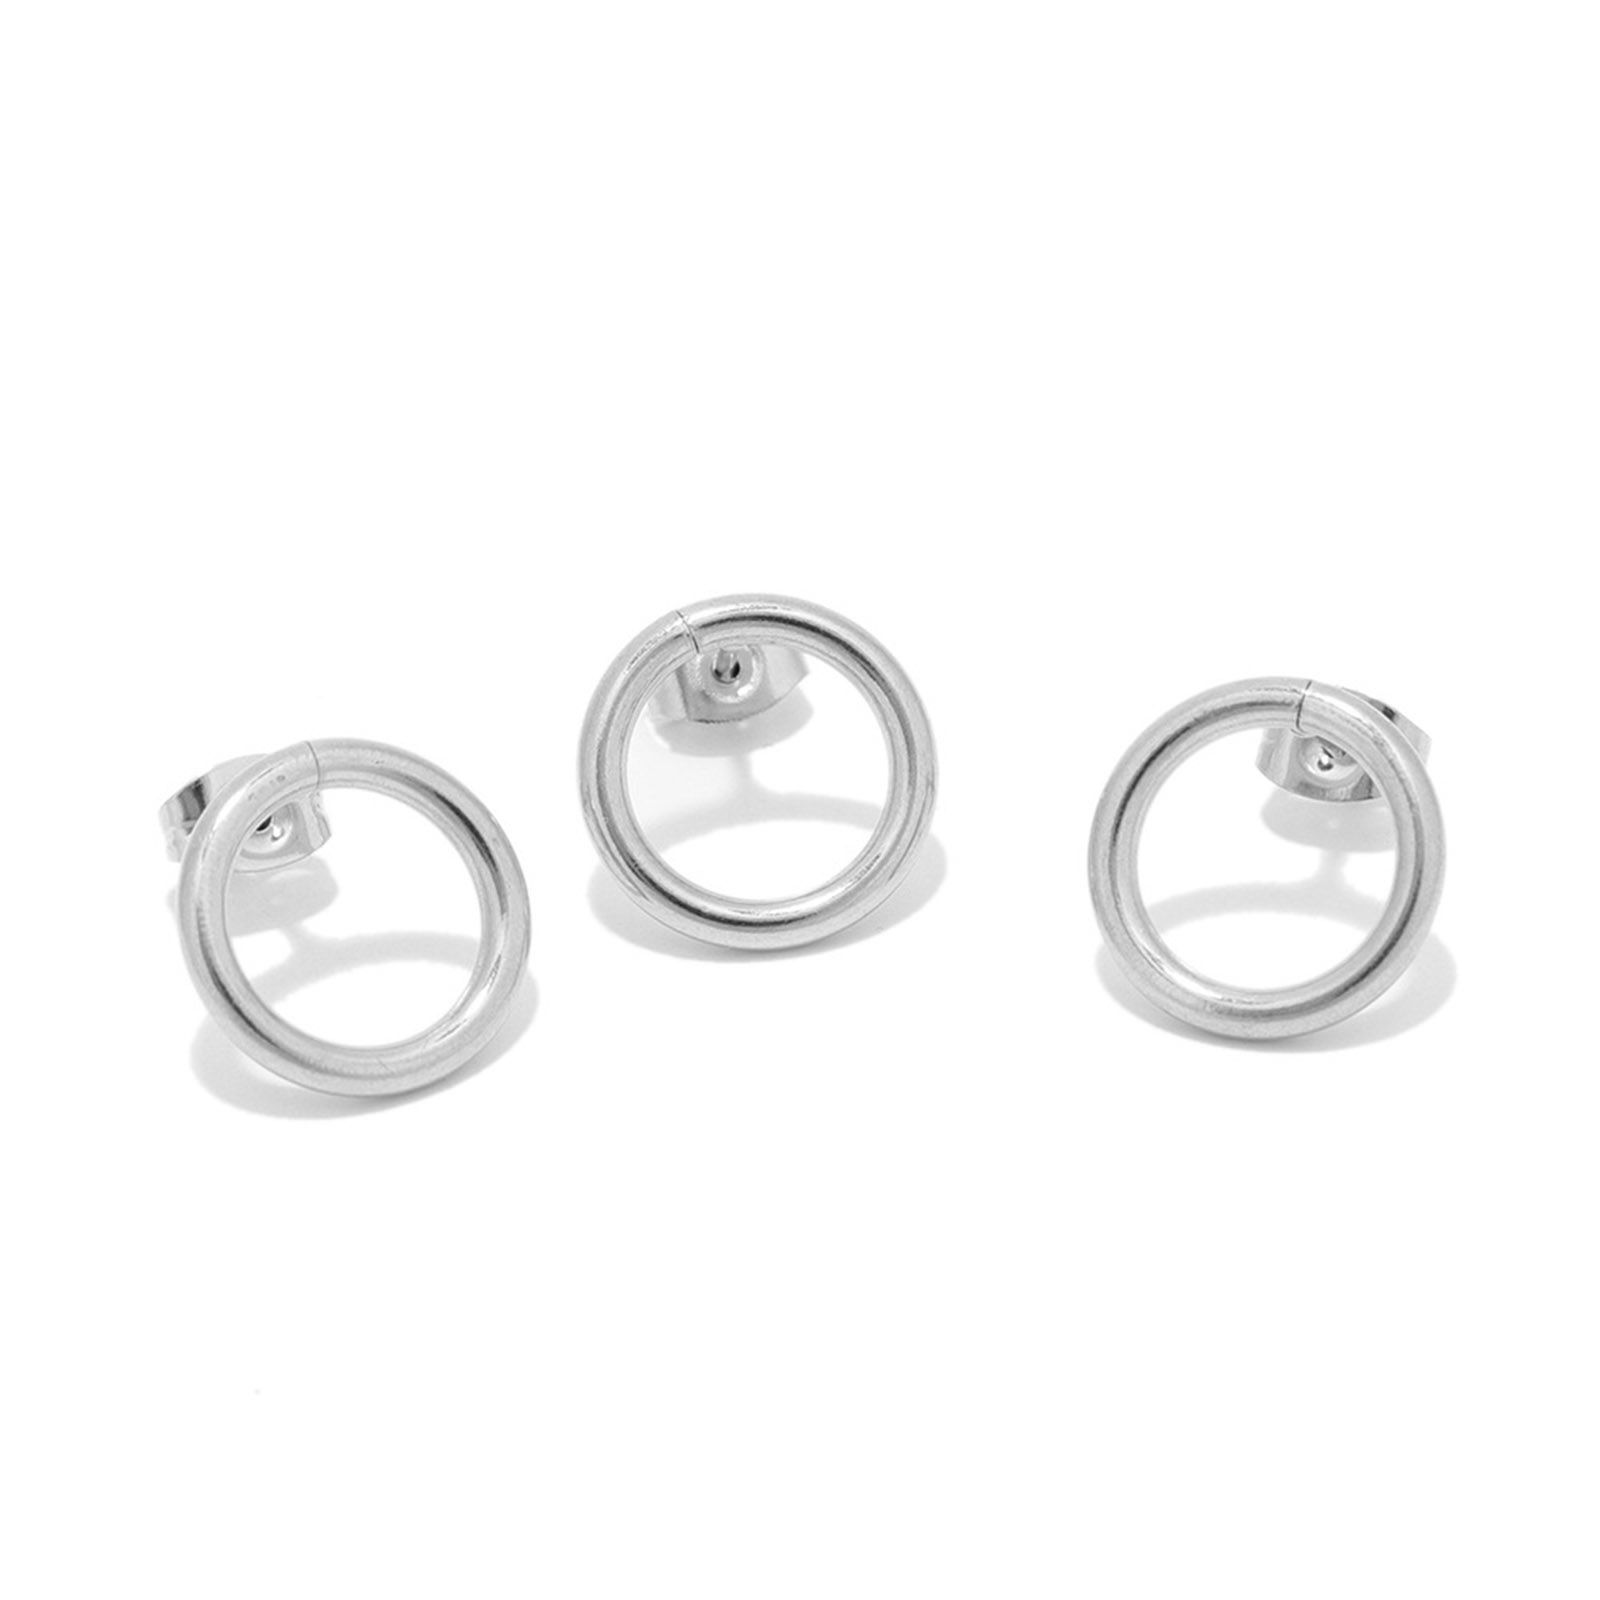 Picture of Stainless Steel Ins Style Ear Post Stud Earrings Circle Ring Silver Tone 12mm Dia., Post/ Wire Size: (20 gauge), 1 Piece